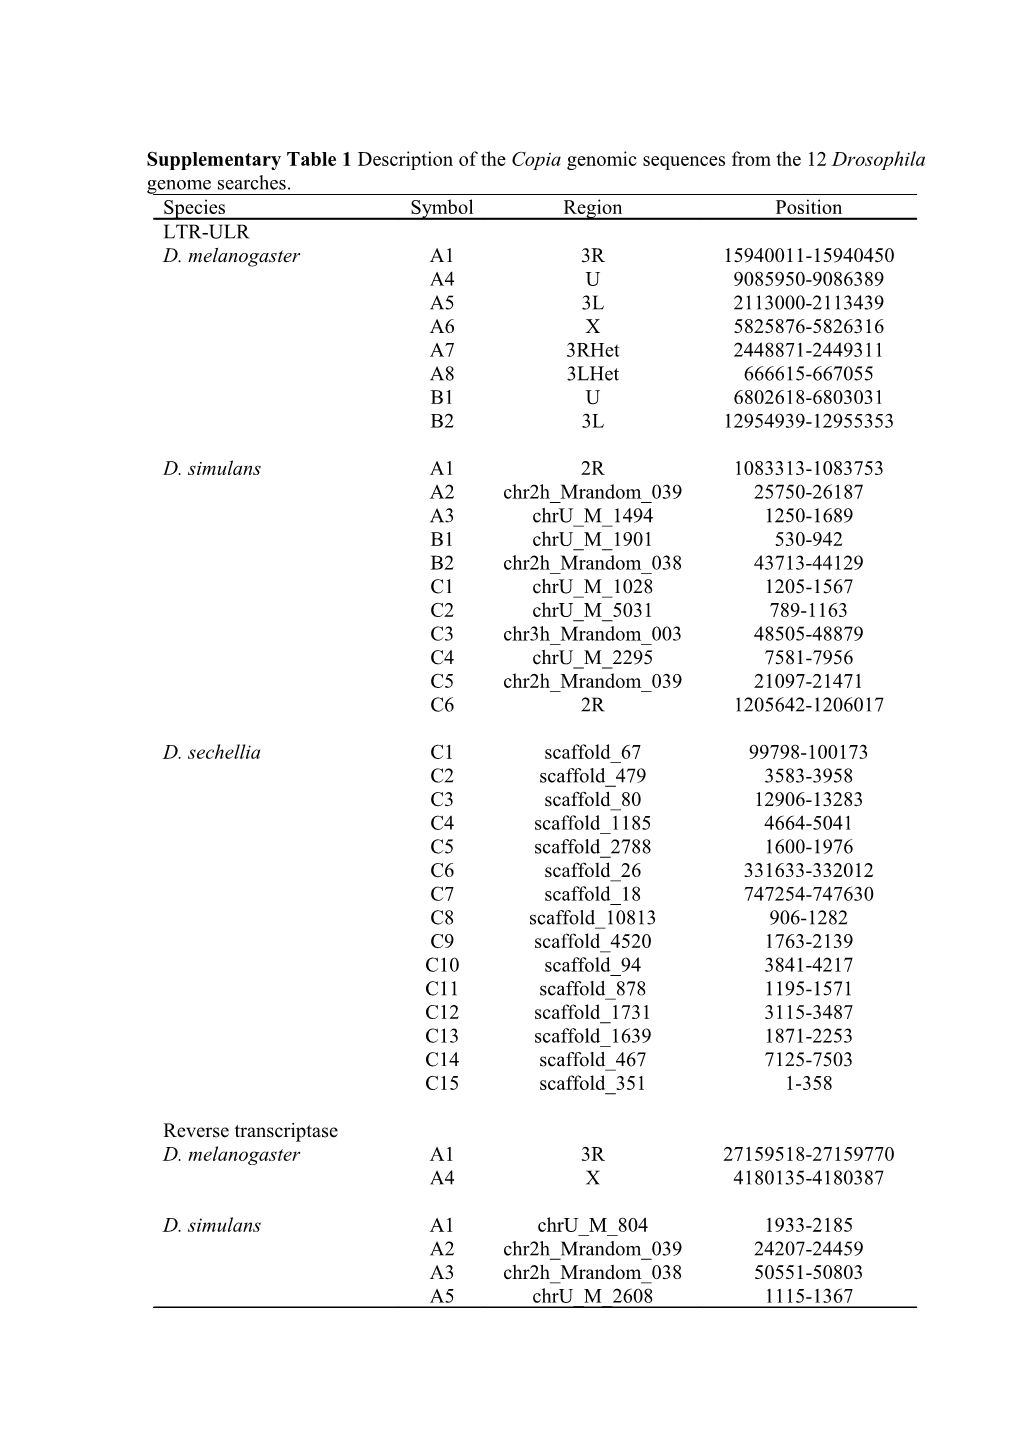 Supplementary Table 1 Description of the Copia Genomic Sequences from the 12 Drosophila